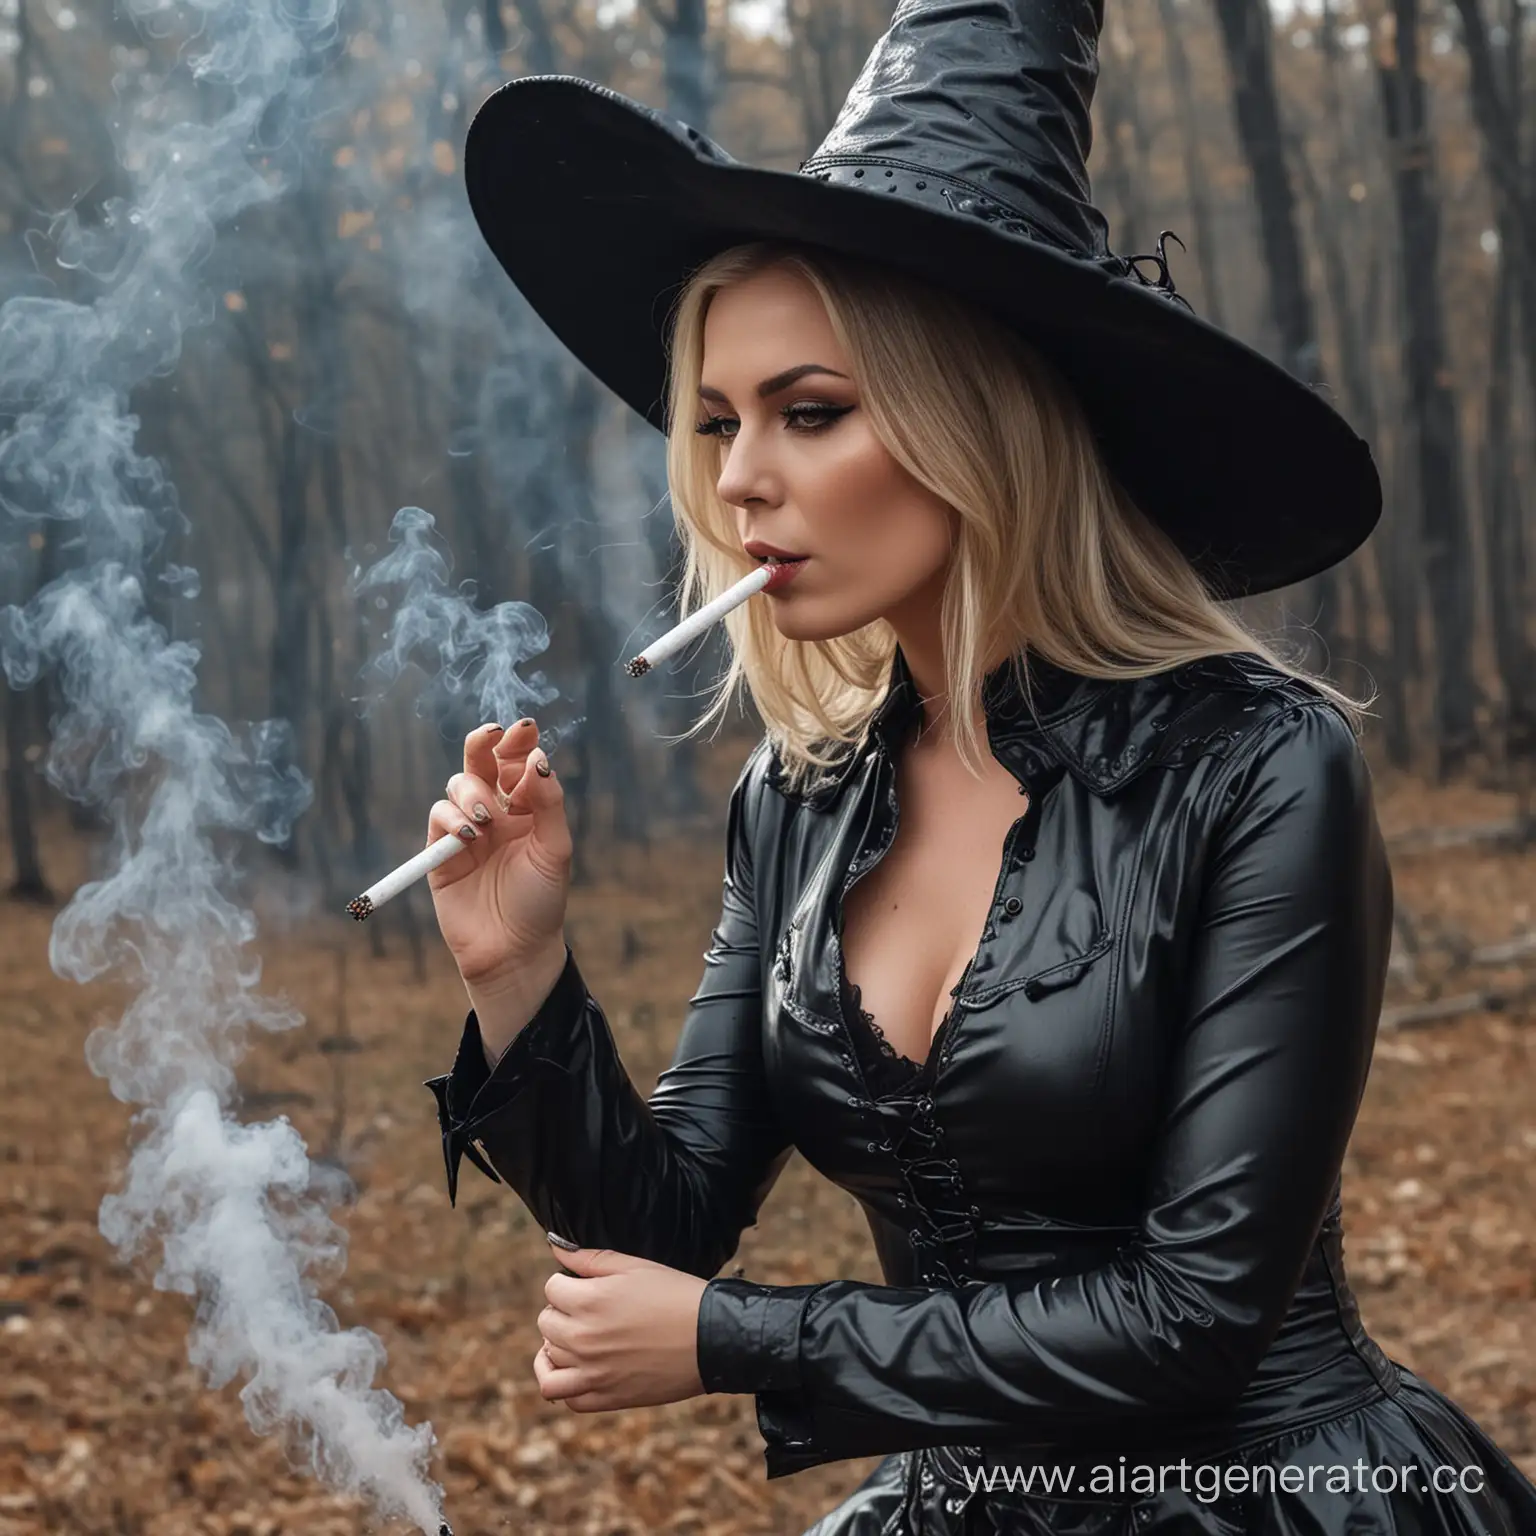 Witch-in-Fashionable-Latex-Outfit-Smoking-and-Interacting-with-Man